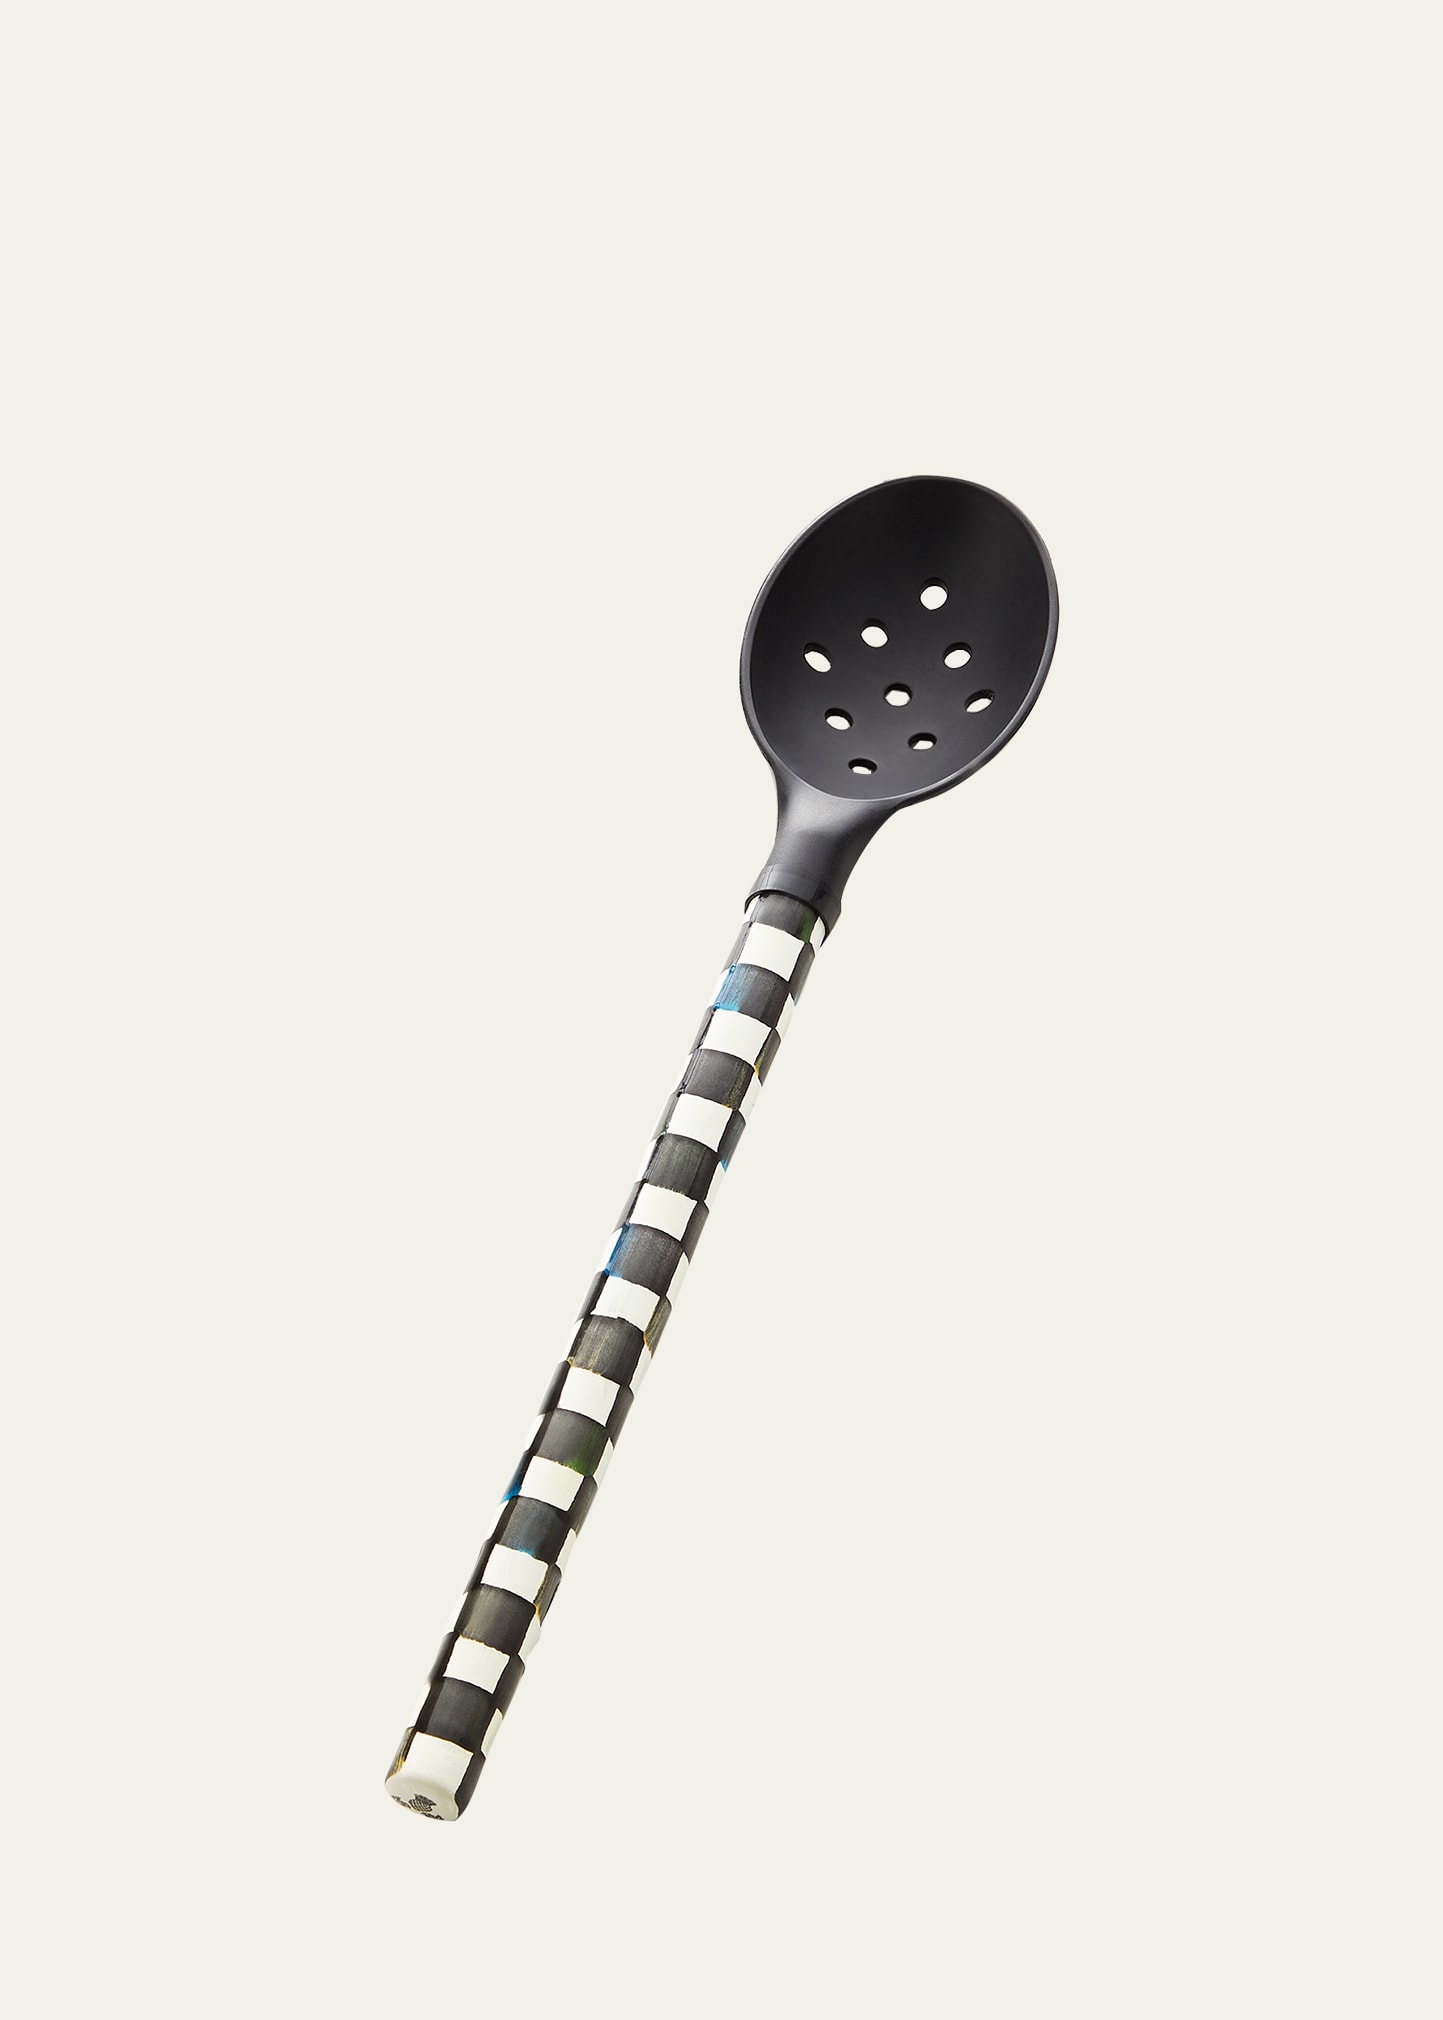 Mackenzie-childs Courtly Check Slotted Spoon, Black